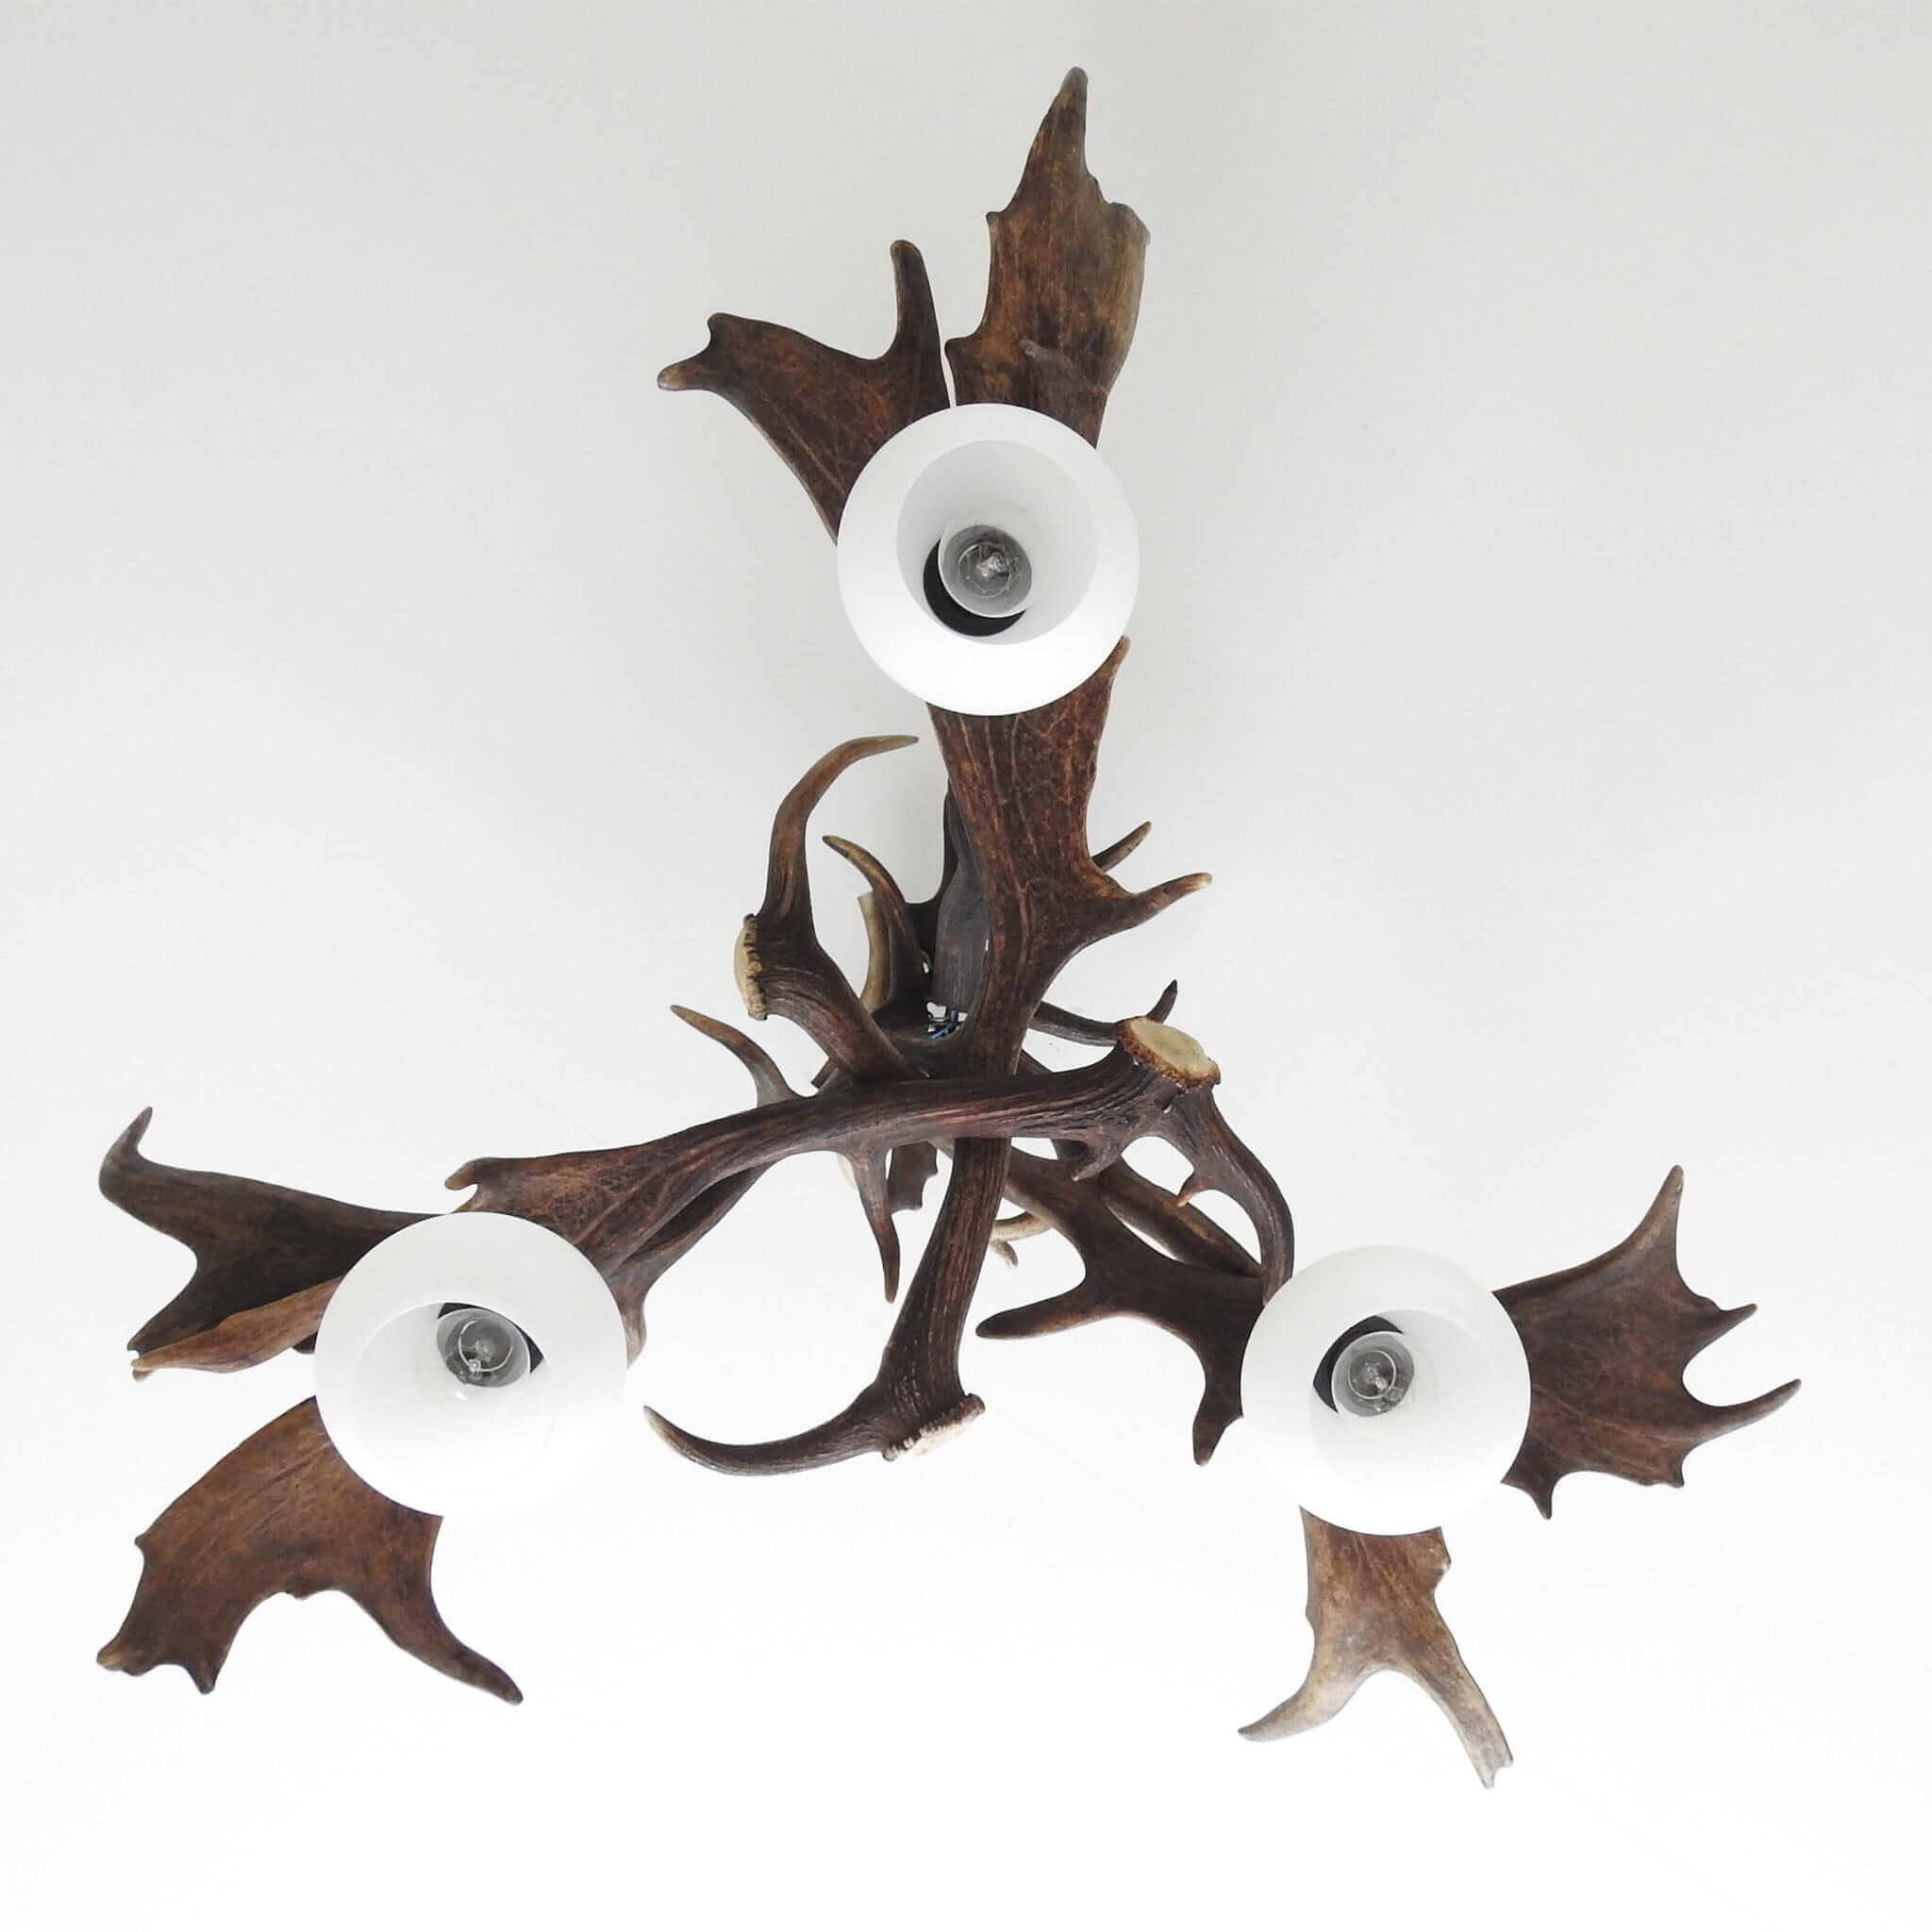 Antler chandelier with shades, view from the bottom.